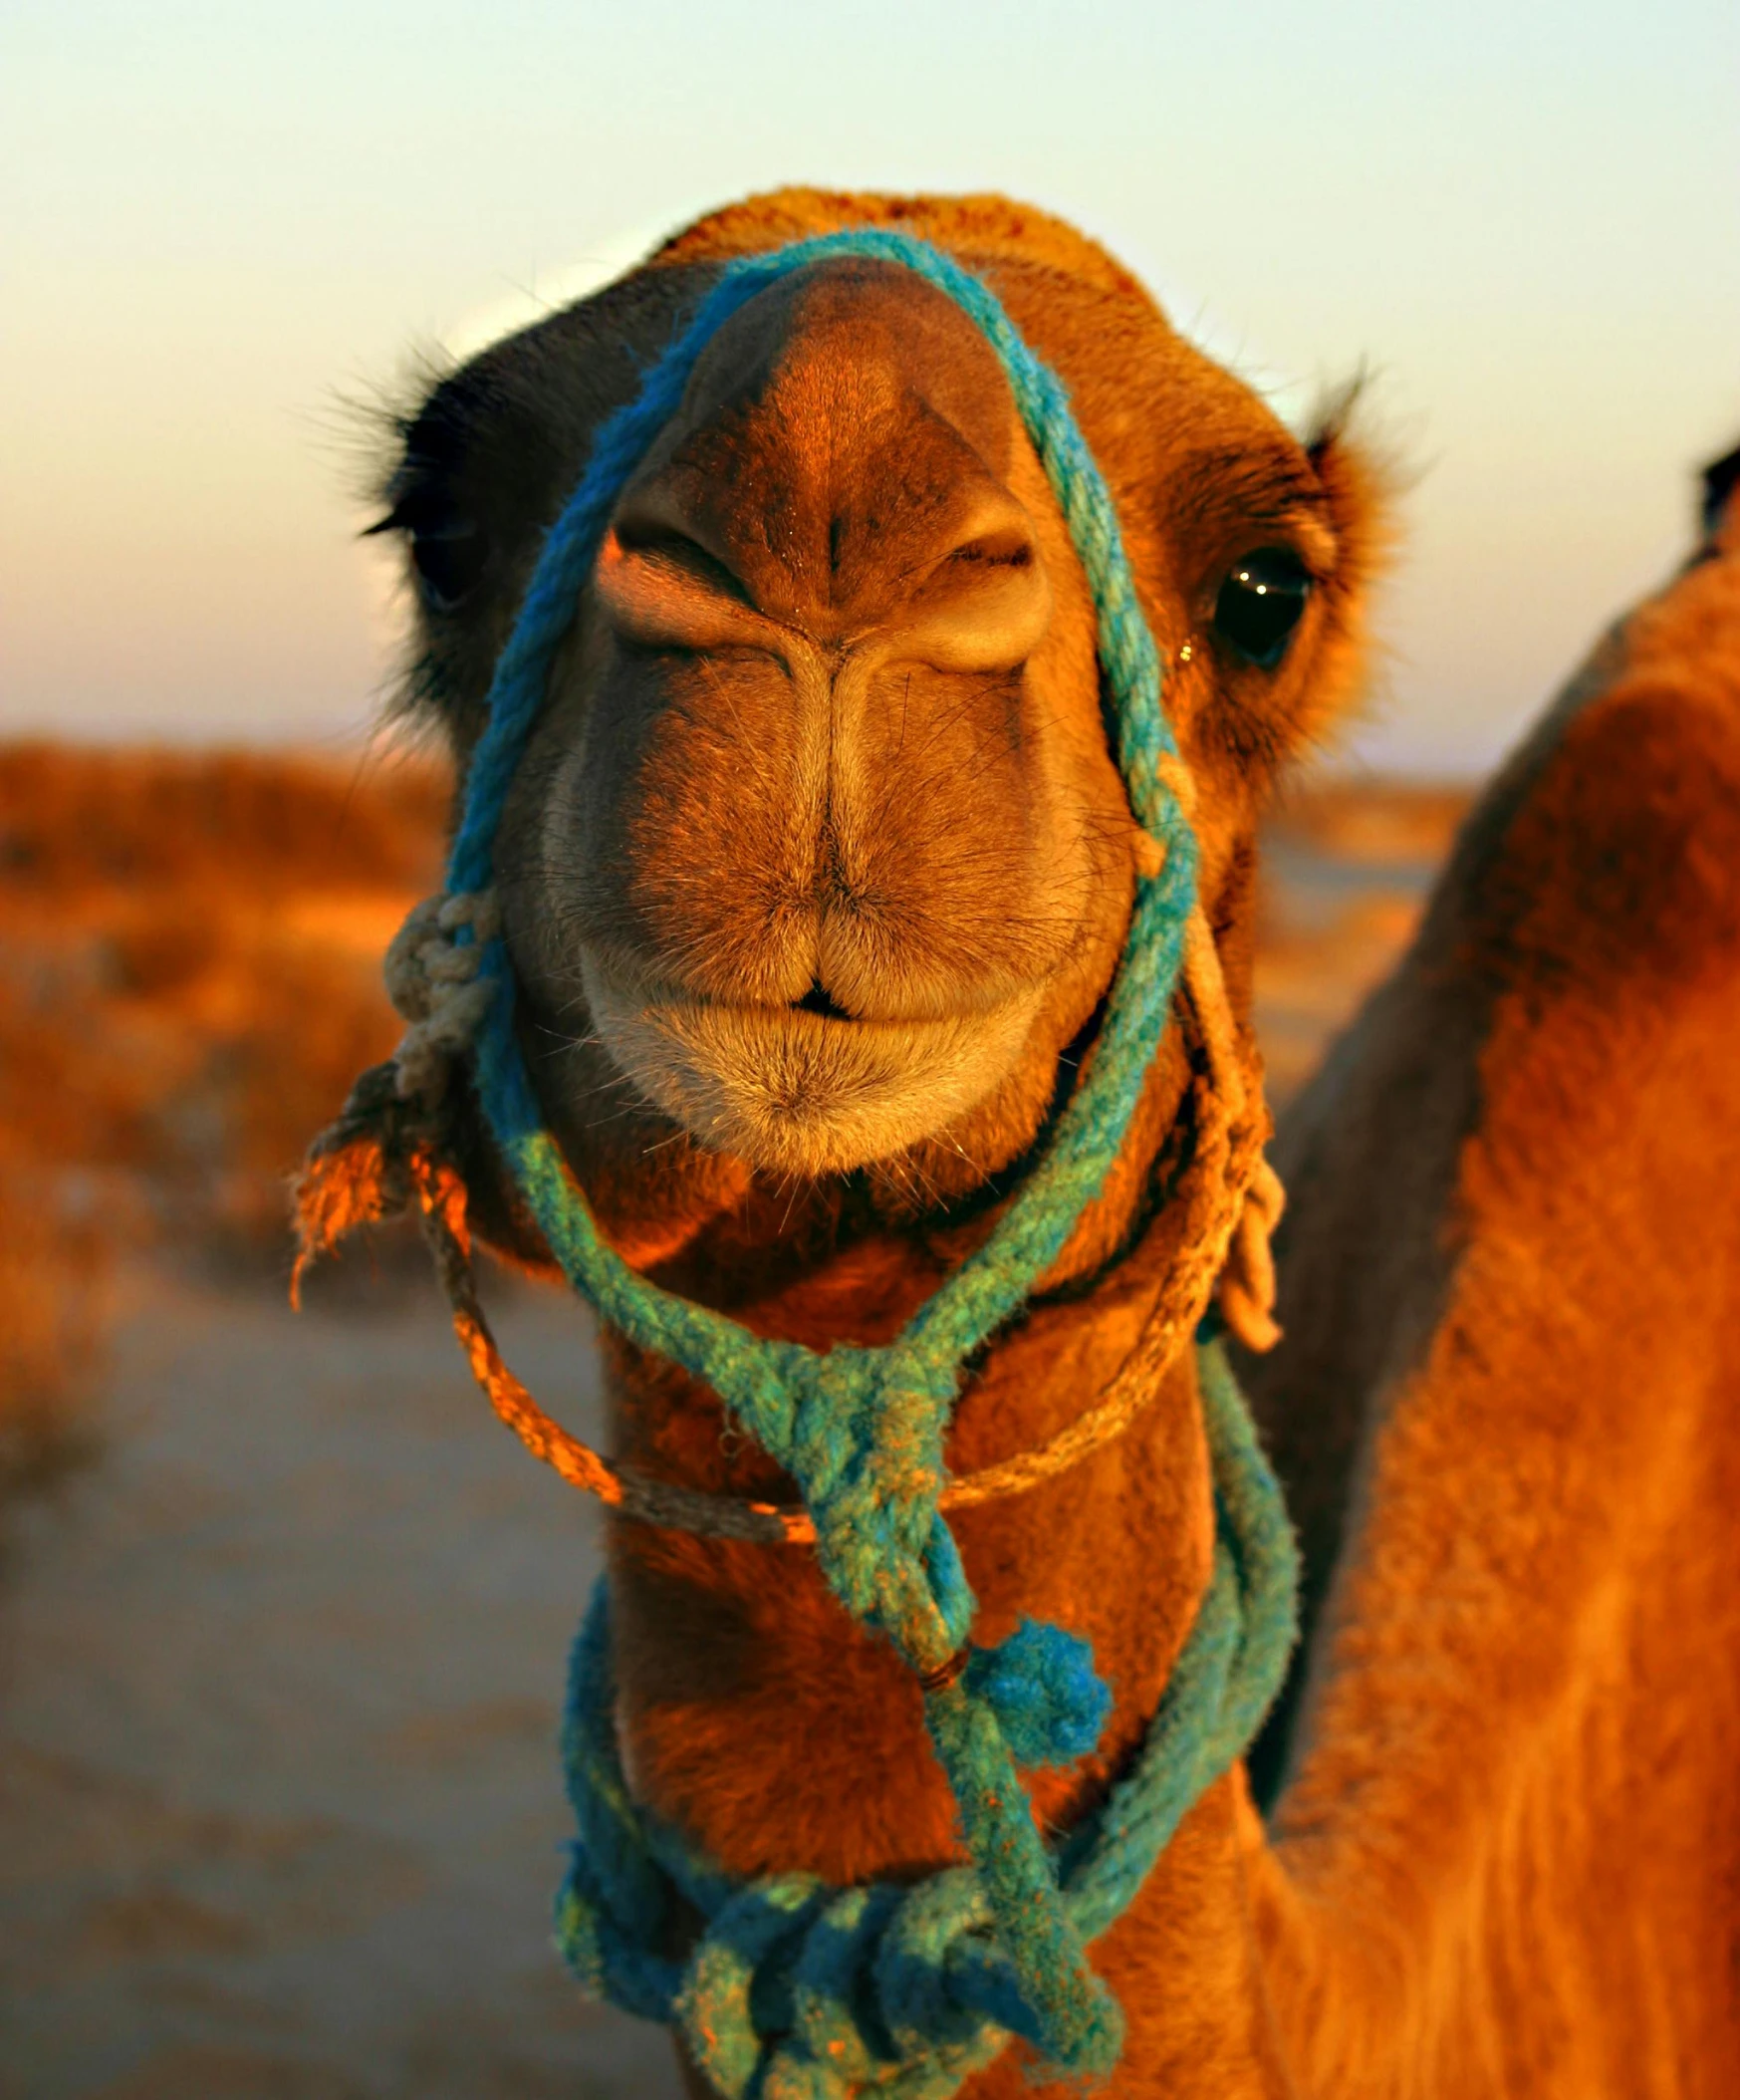 a brown camel with blue head ring and rope around his neck